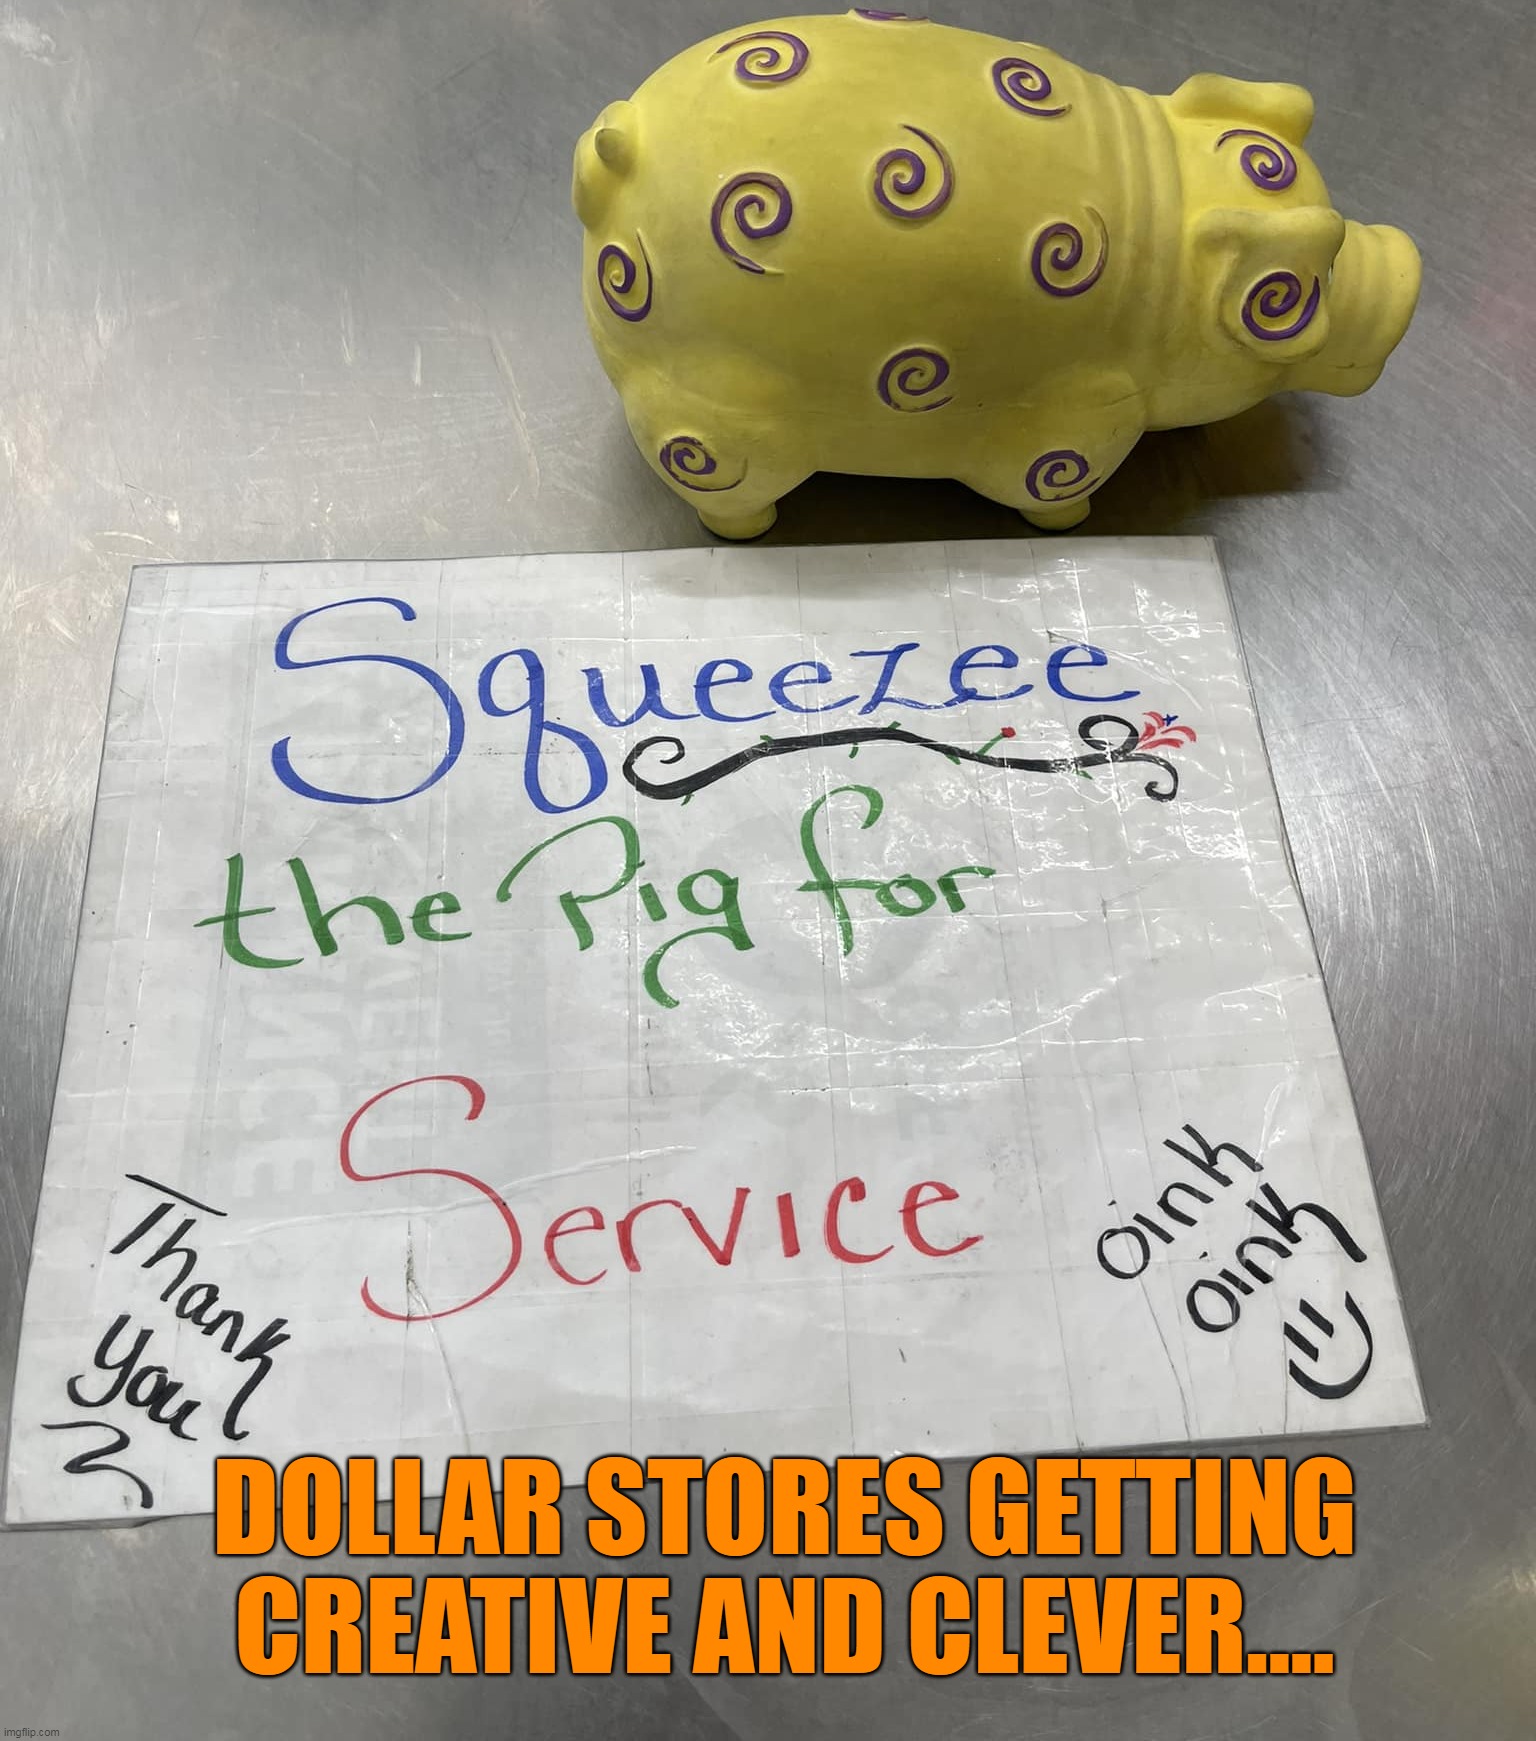 DOLLAR STORES GETTING CREATIVE AND CLEVER.... | image tagged in memes,meme,funny,humor,signs | made w/ Imgflip meme maker